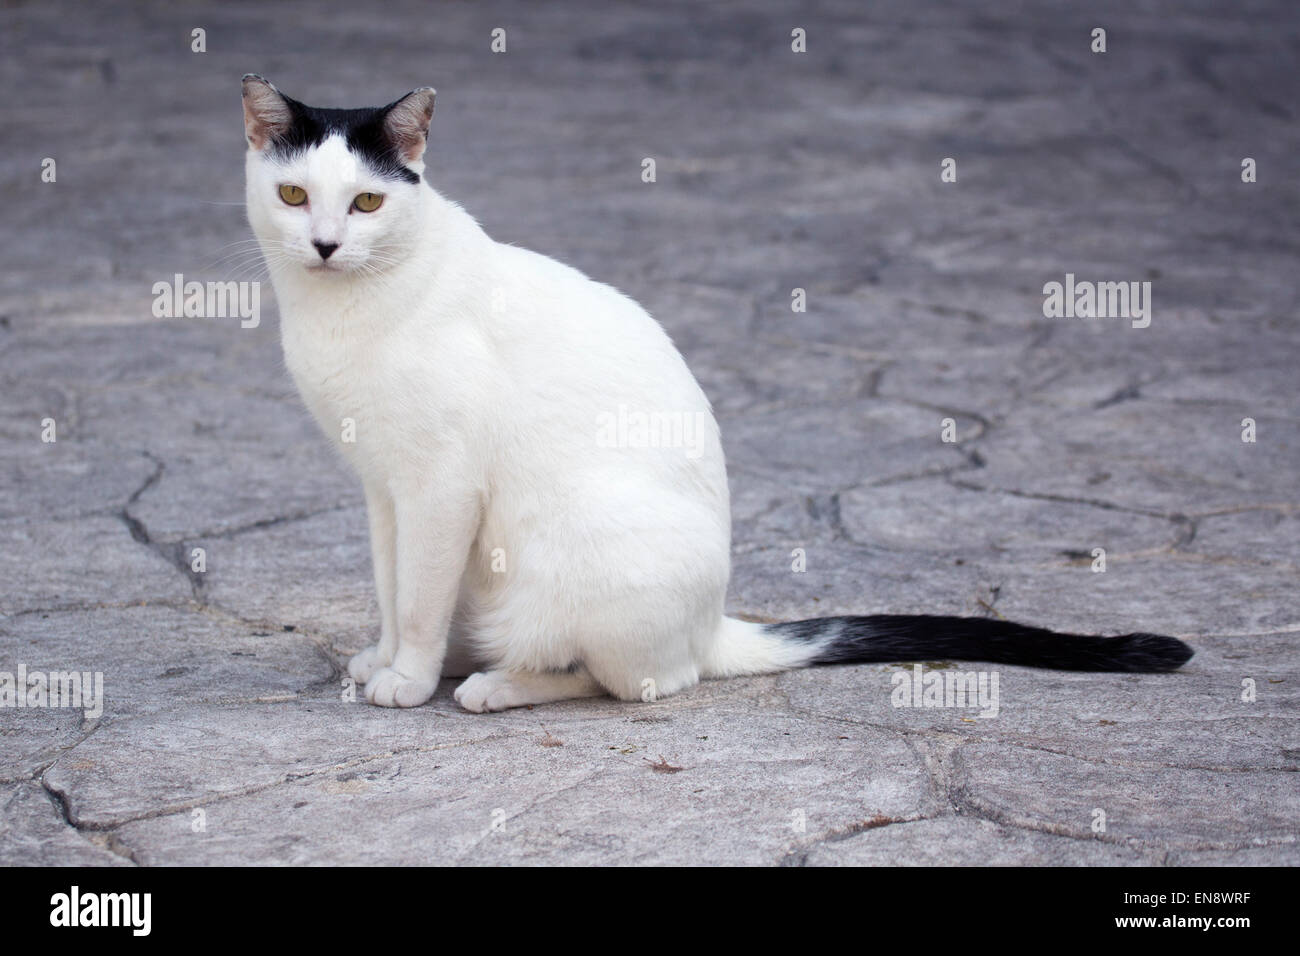 Domestic cat rescued by and living at Sandos Caracol Eco Resort Stock Photo